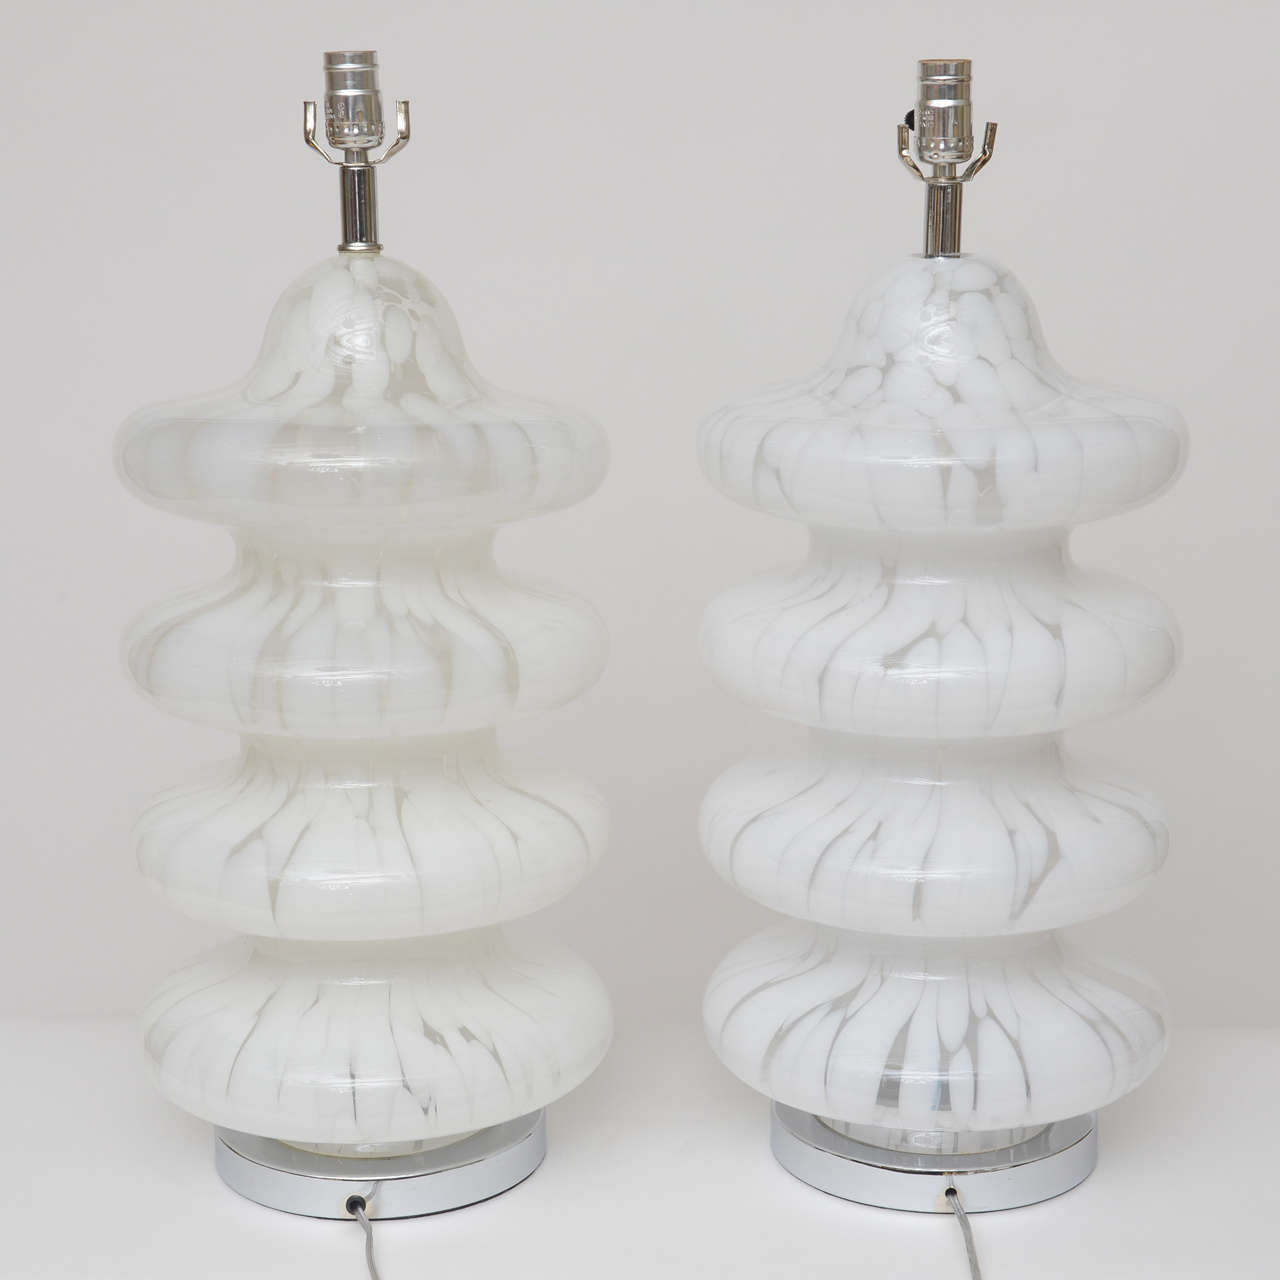 Pair of Large-Scale Murano Glass Lamps 1